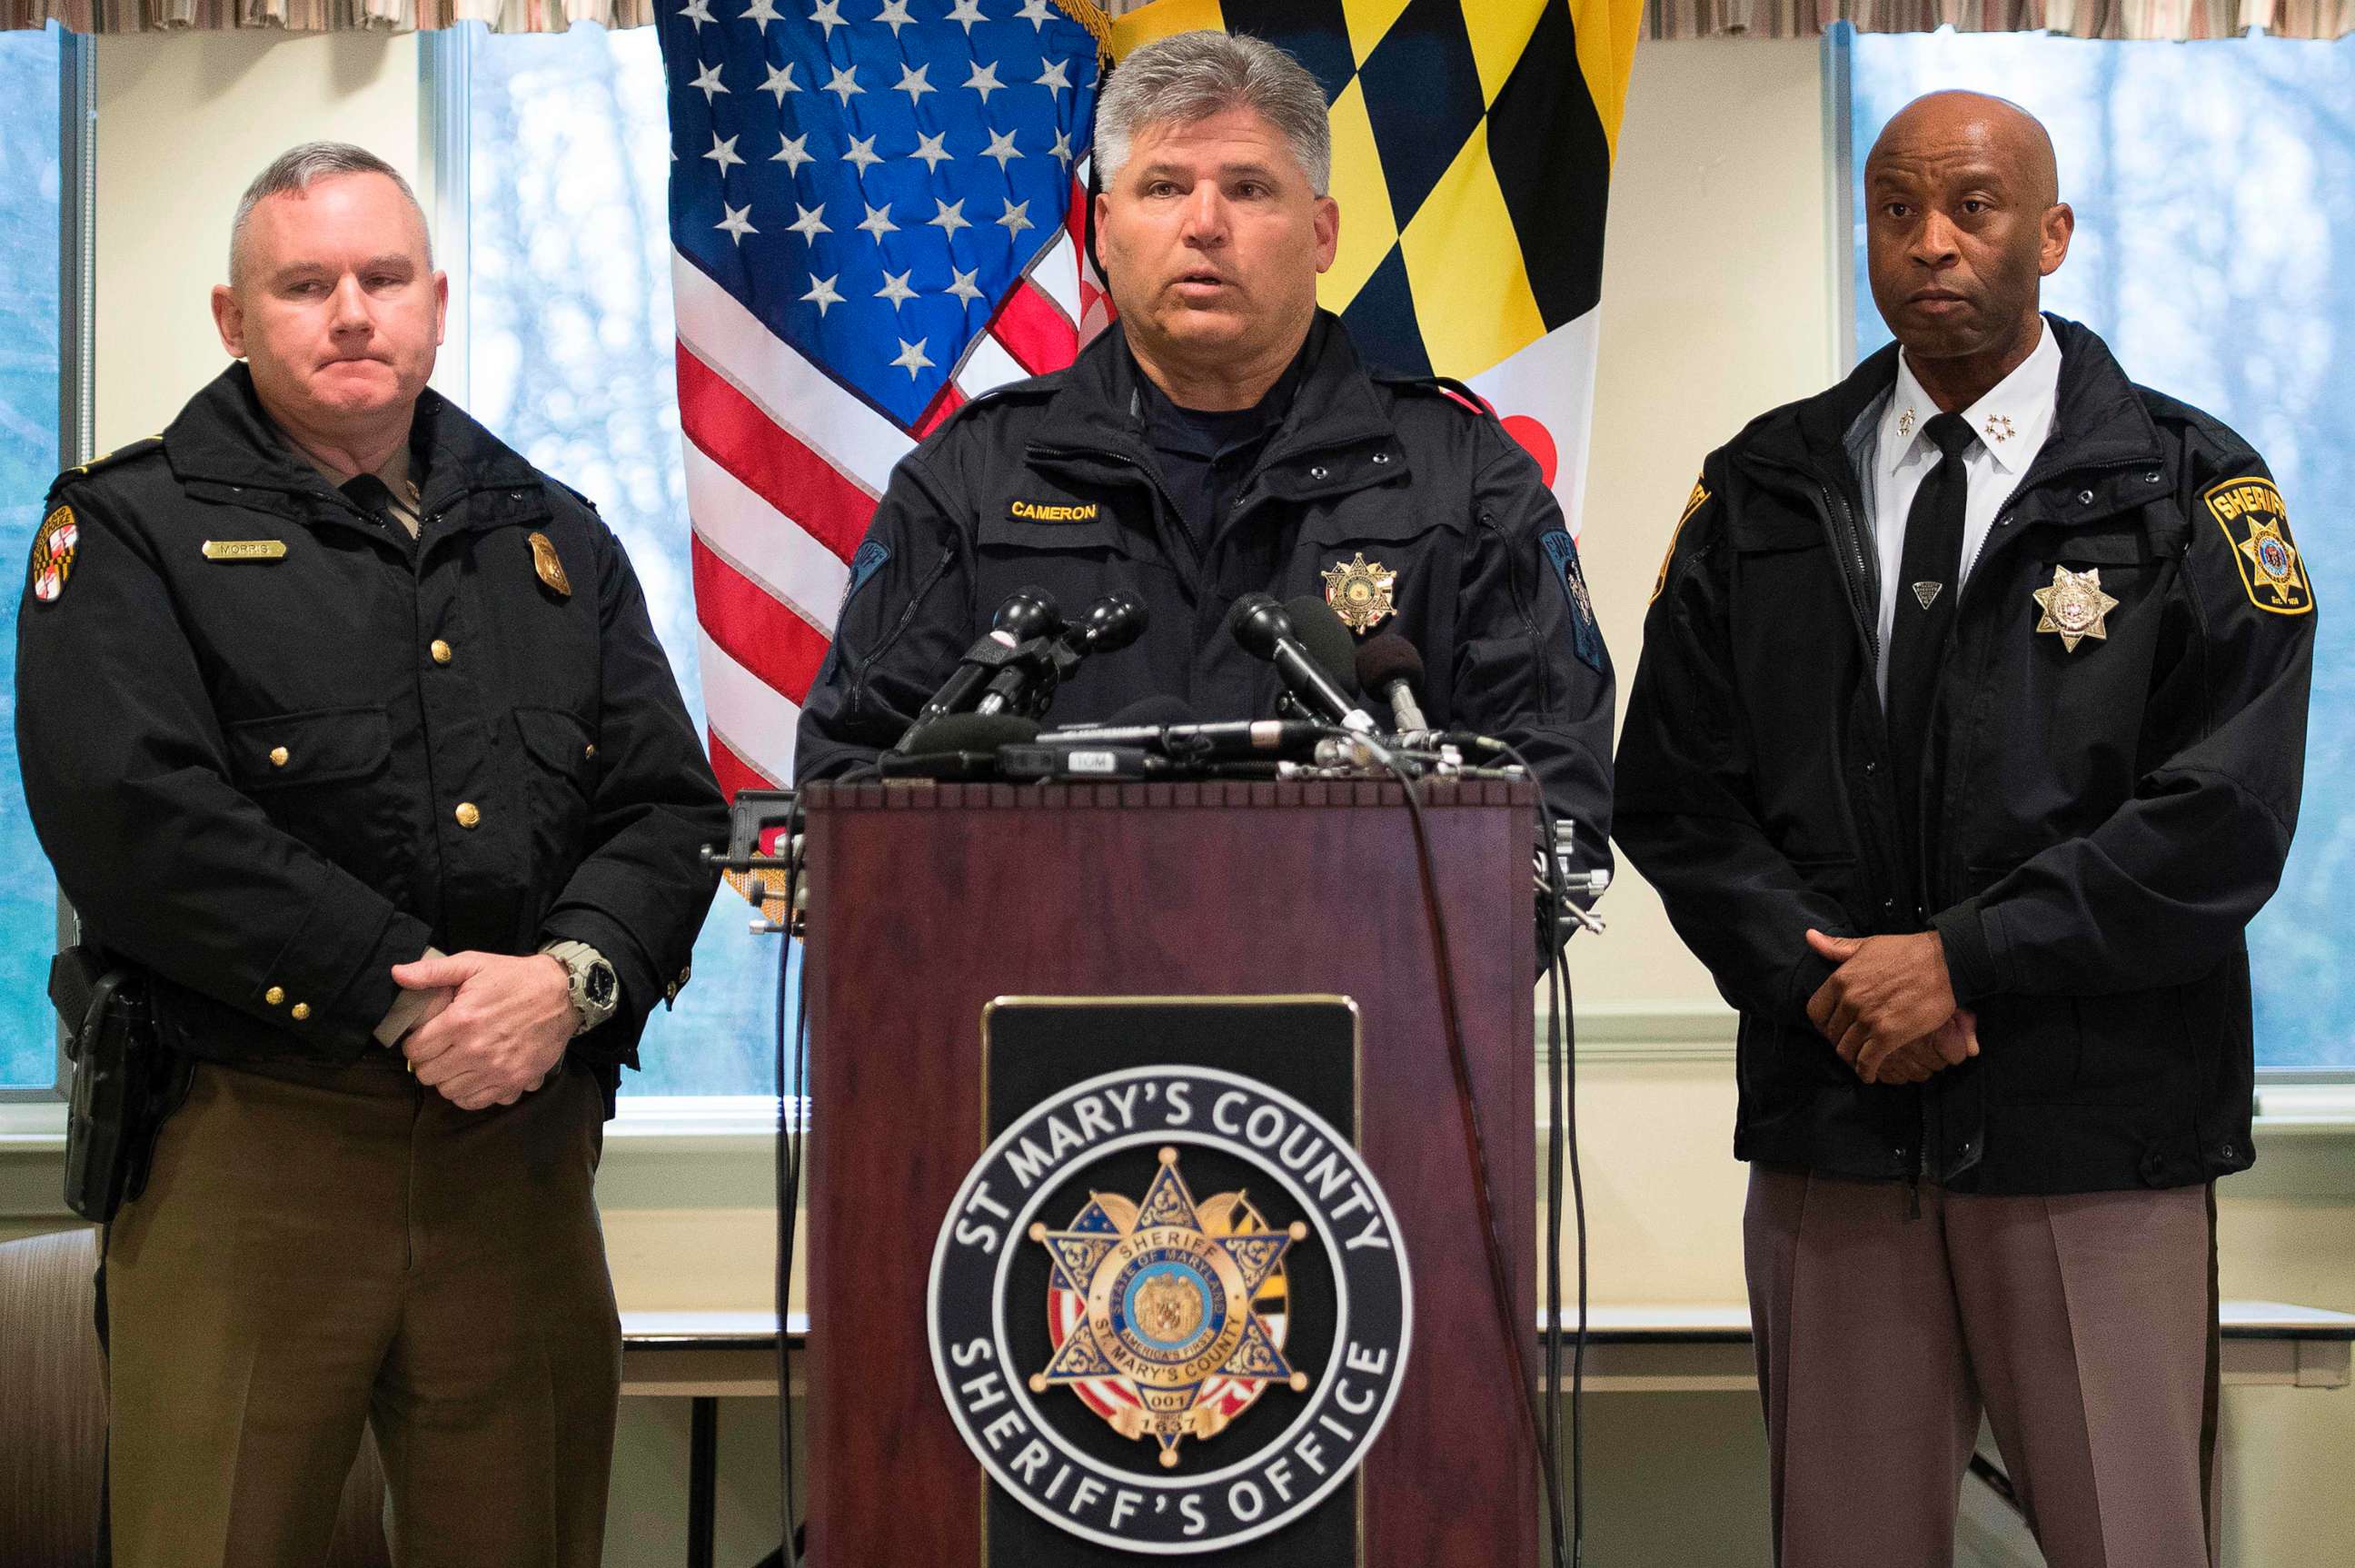 PHOTO: St. Mary's County Sheriff Tim Cameron speaks during a press conference in Great Mills, Maryland on March 20, 2018.